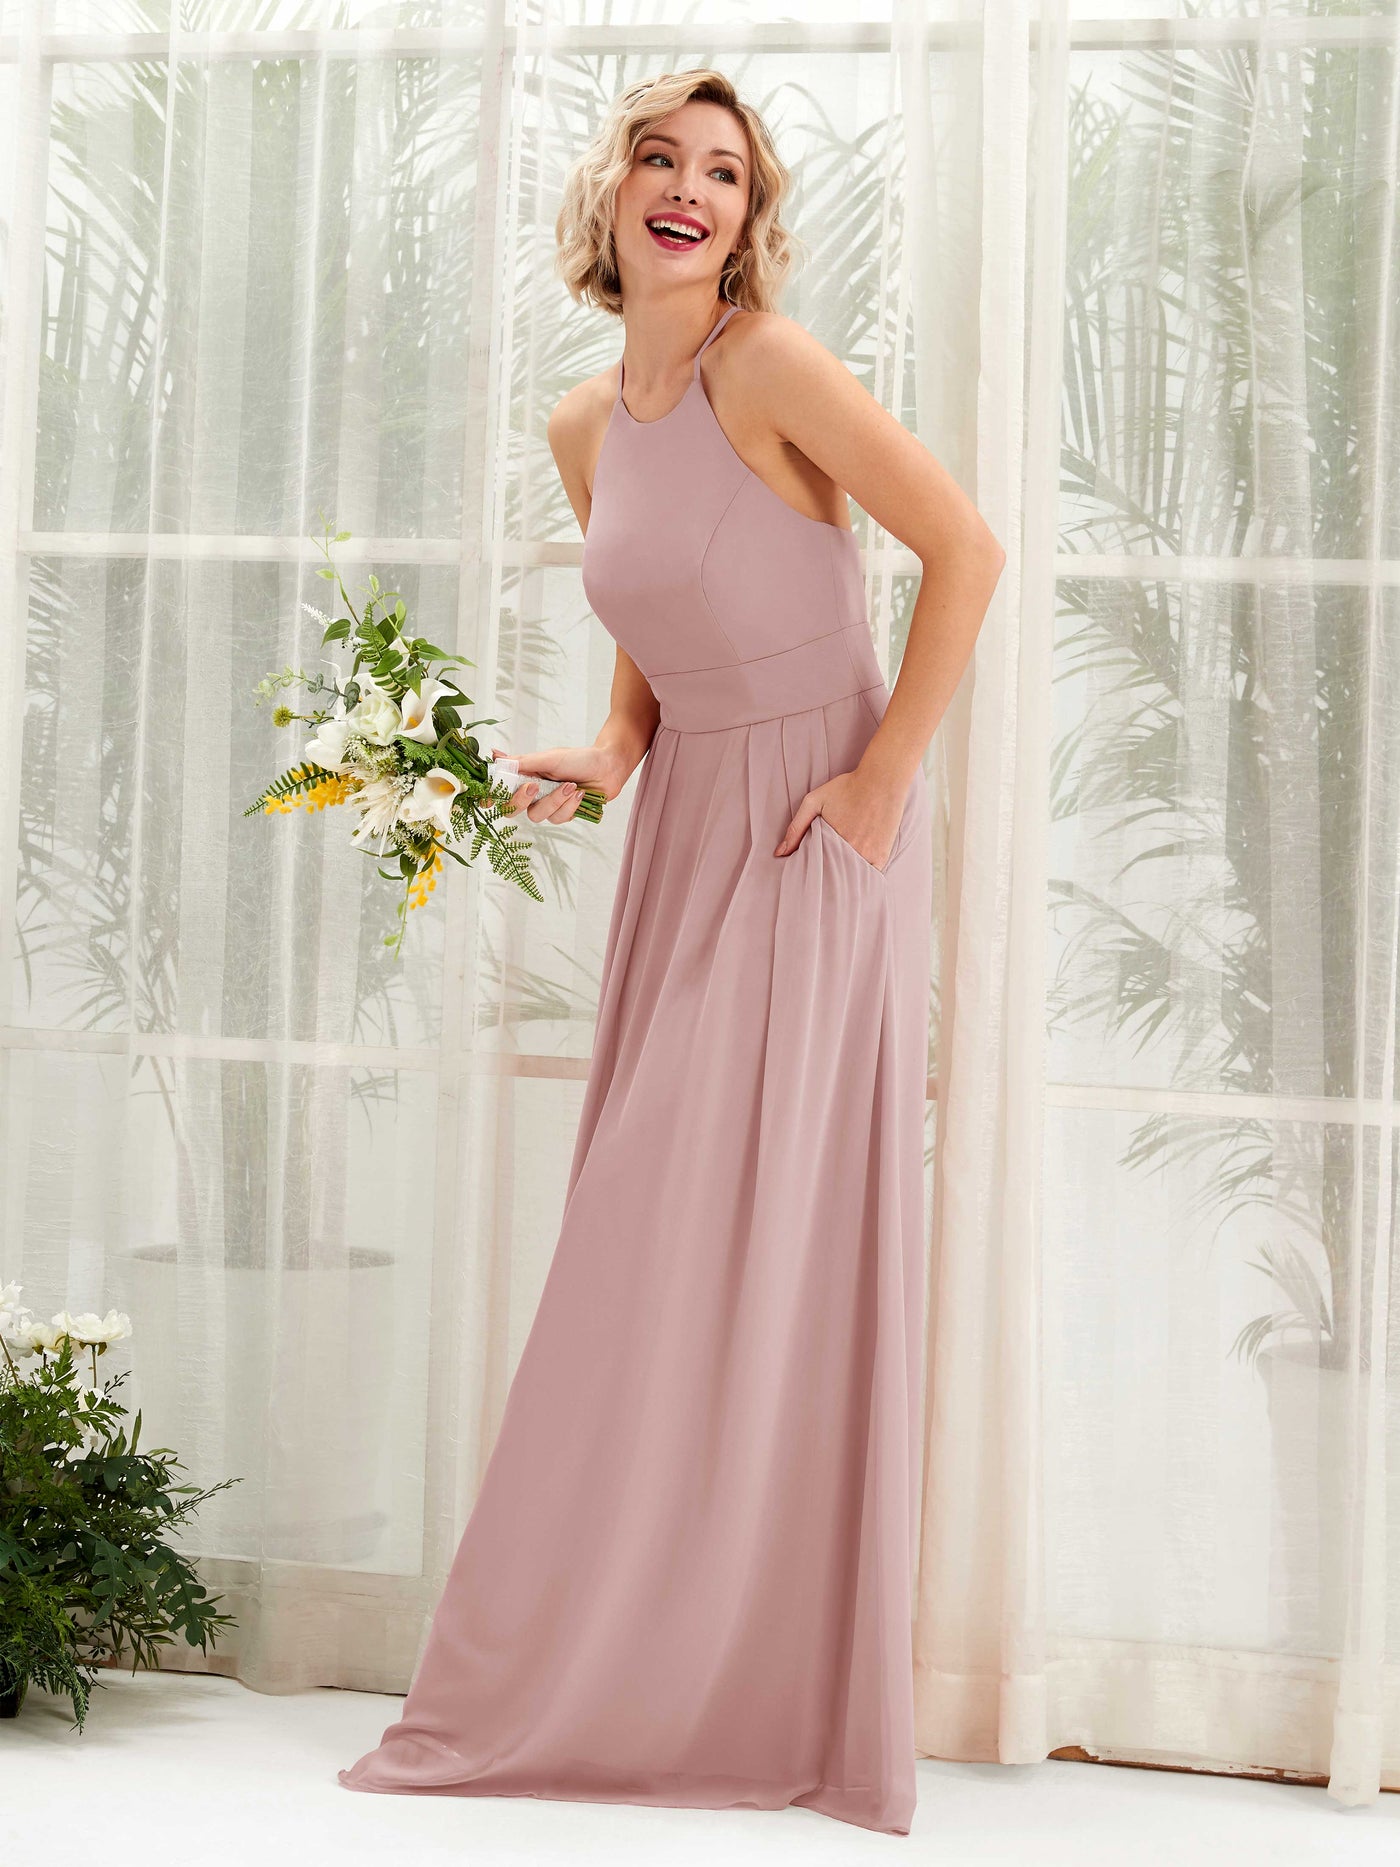 A-line Ball Gown Halter Spaghetti-straps Sleeveless Bridesmaid Dress - Dusty Rose (81225209)#color_dusty-rose